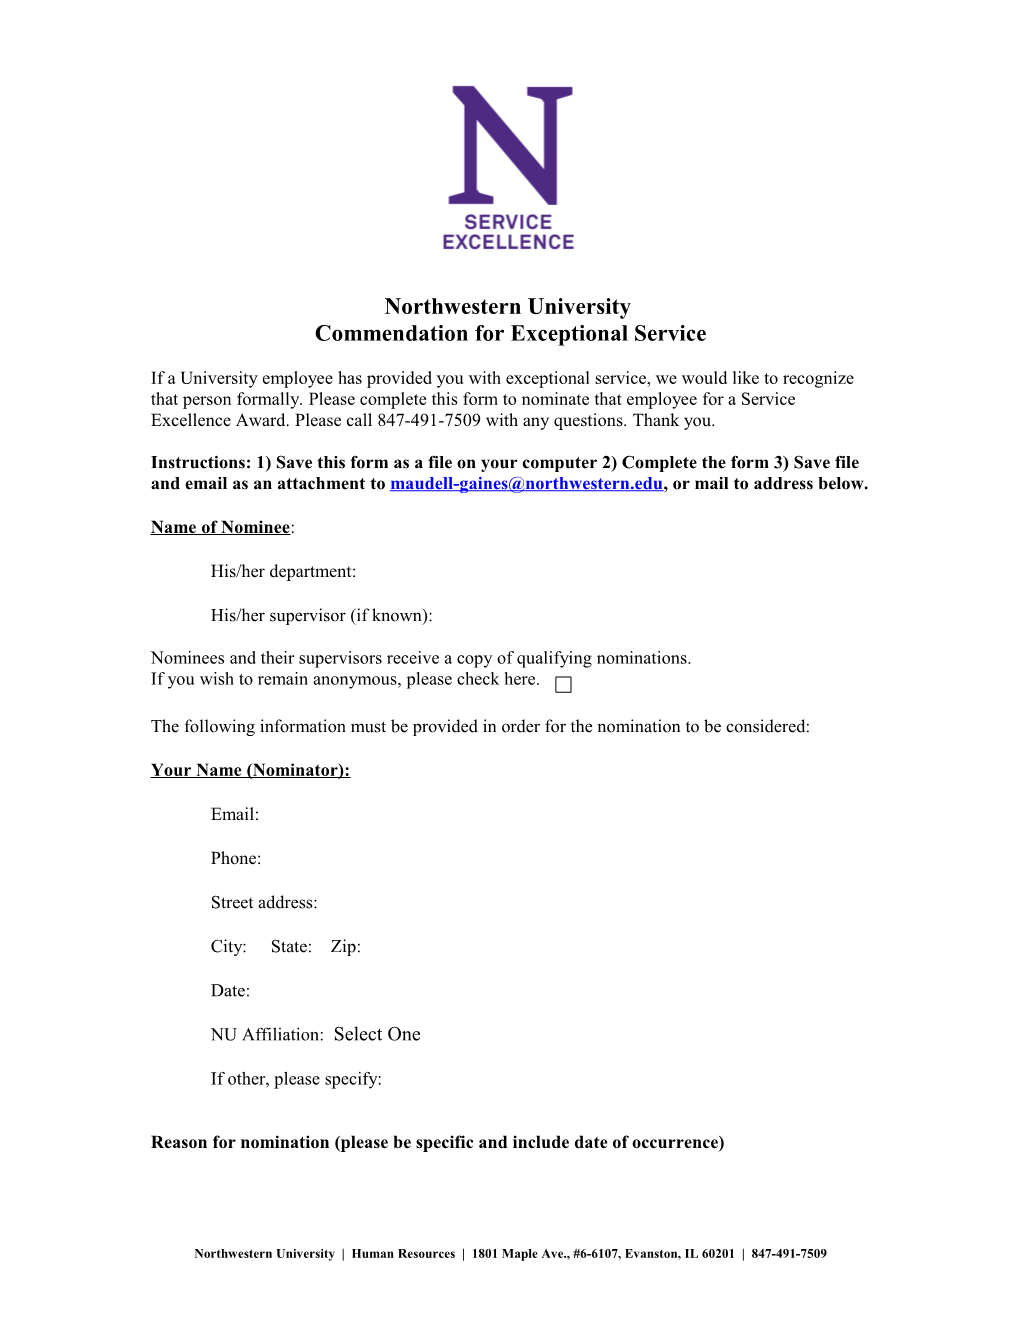 Northwestern University Commendation For Exceptional Service